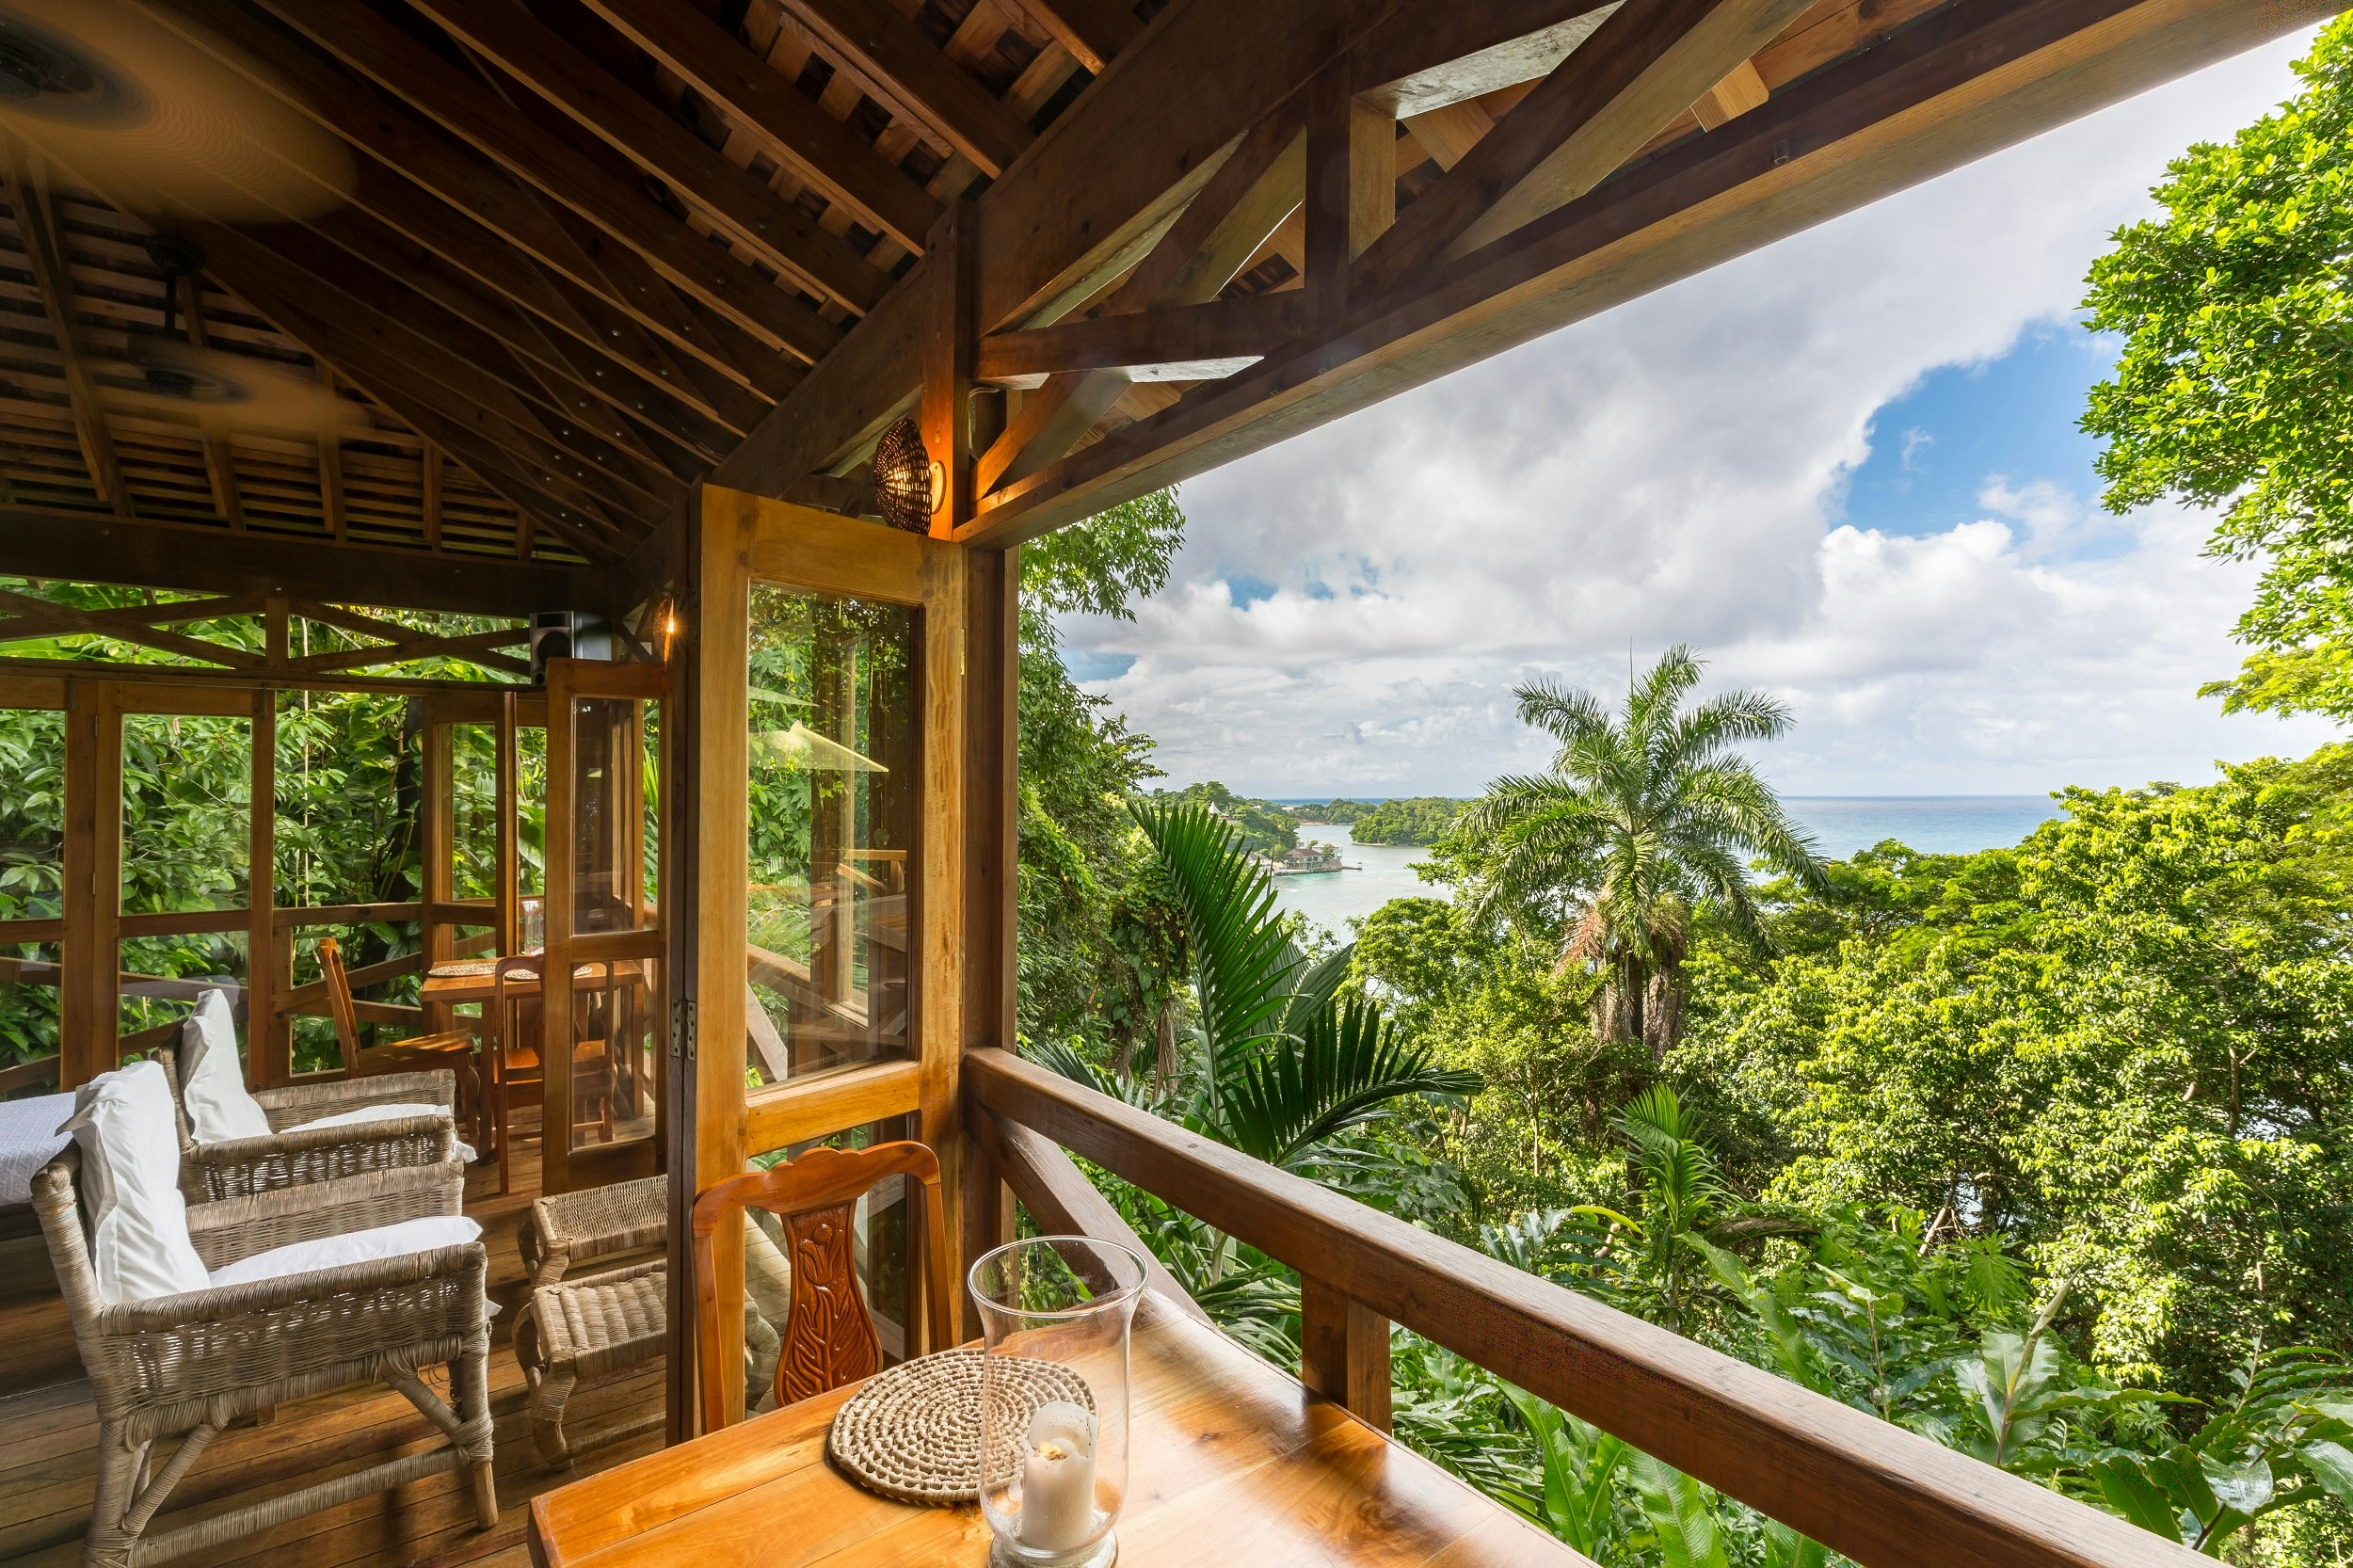 A view looking out through the open wall of Kanopi House's dining room; the wood-and-glass bifold doors open the entire wall of the traditional wood-framed structure and offer incredible views down over lush tropical forest to the coast below.